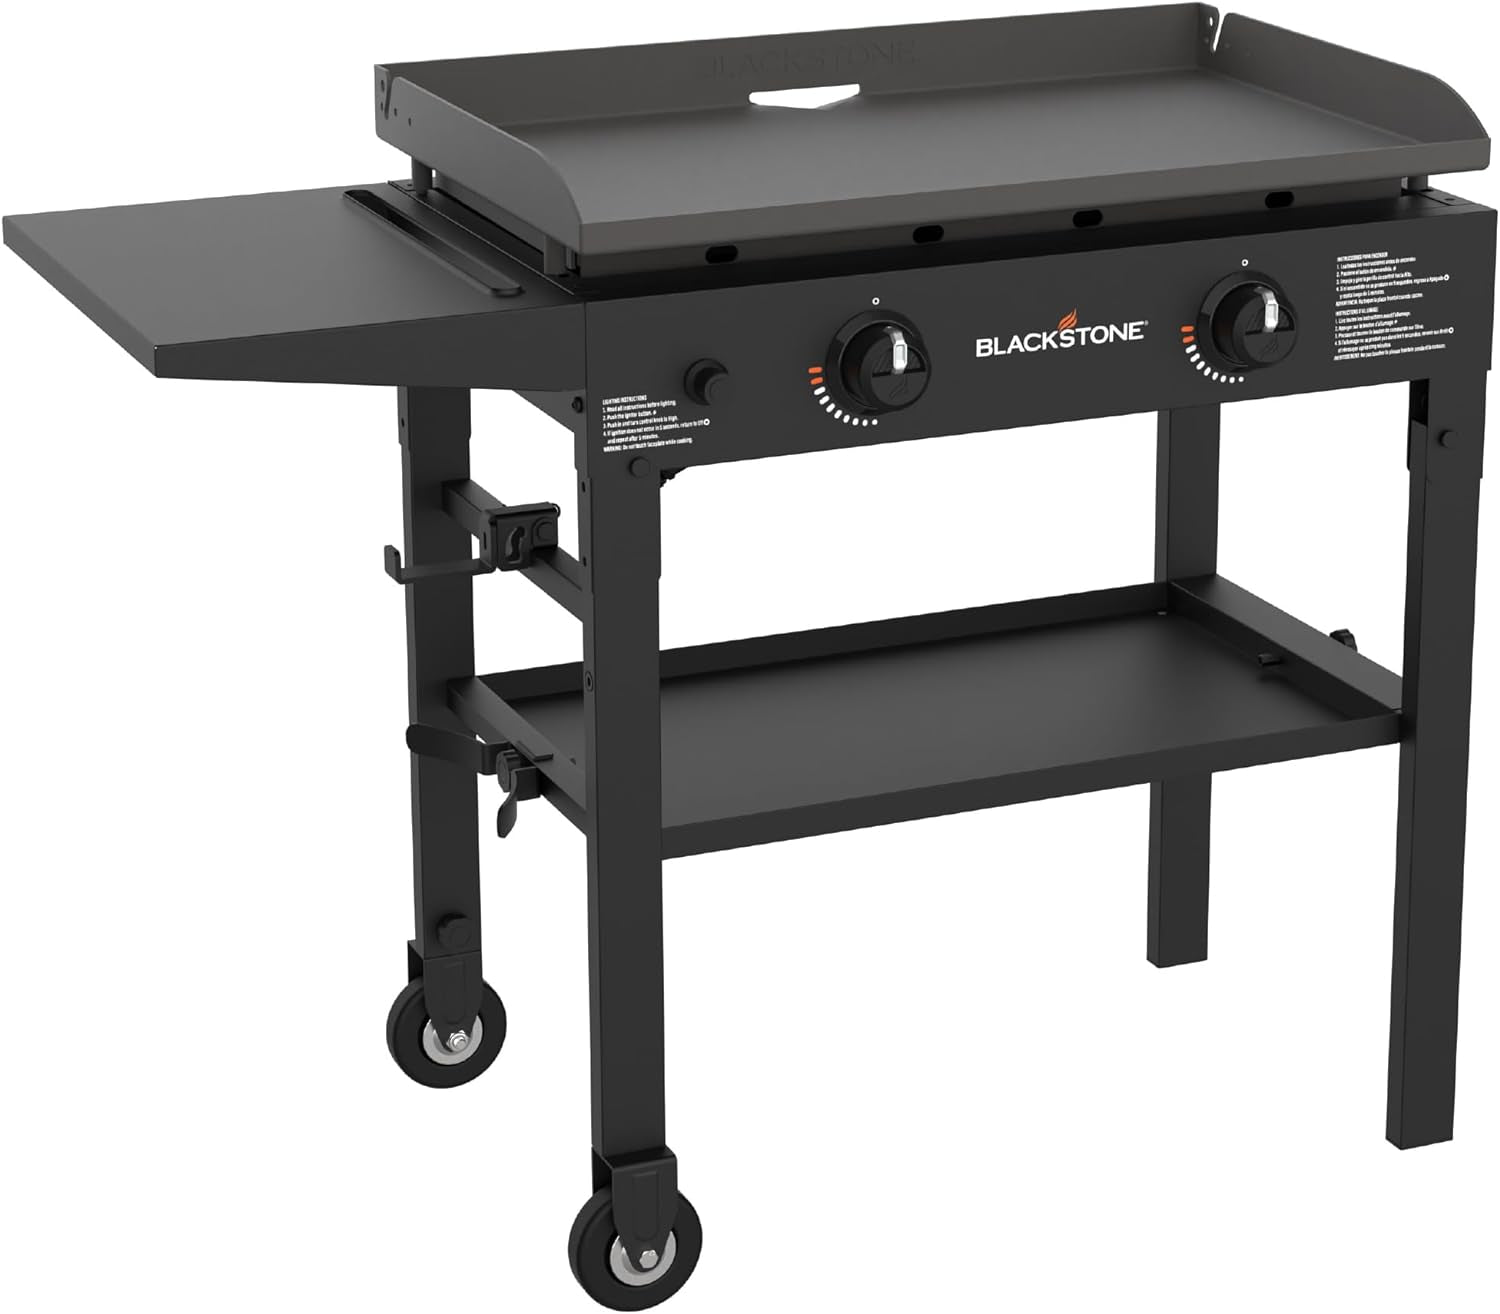 Flat Top Gas Grill Griddle 2 Burner Propane Fuelled Rear Grease Management System, 1517, Outdoor Griddle Station for Camping, 28 Inch